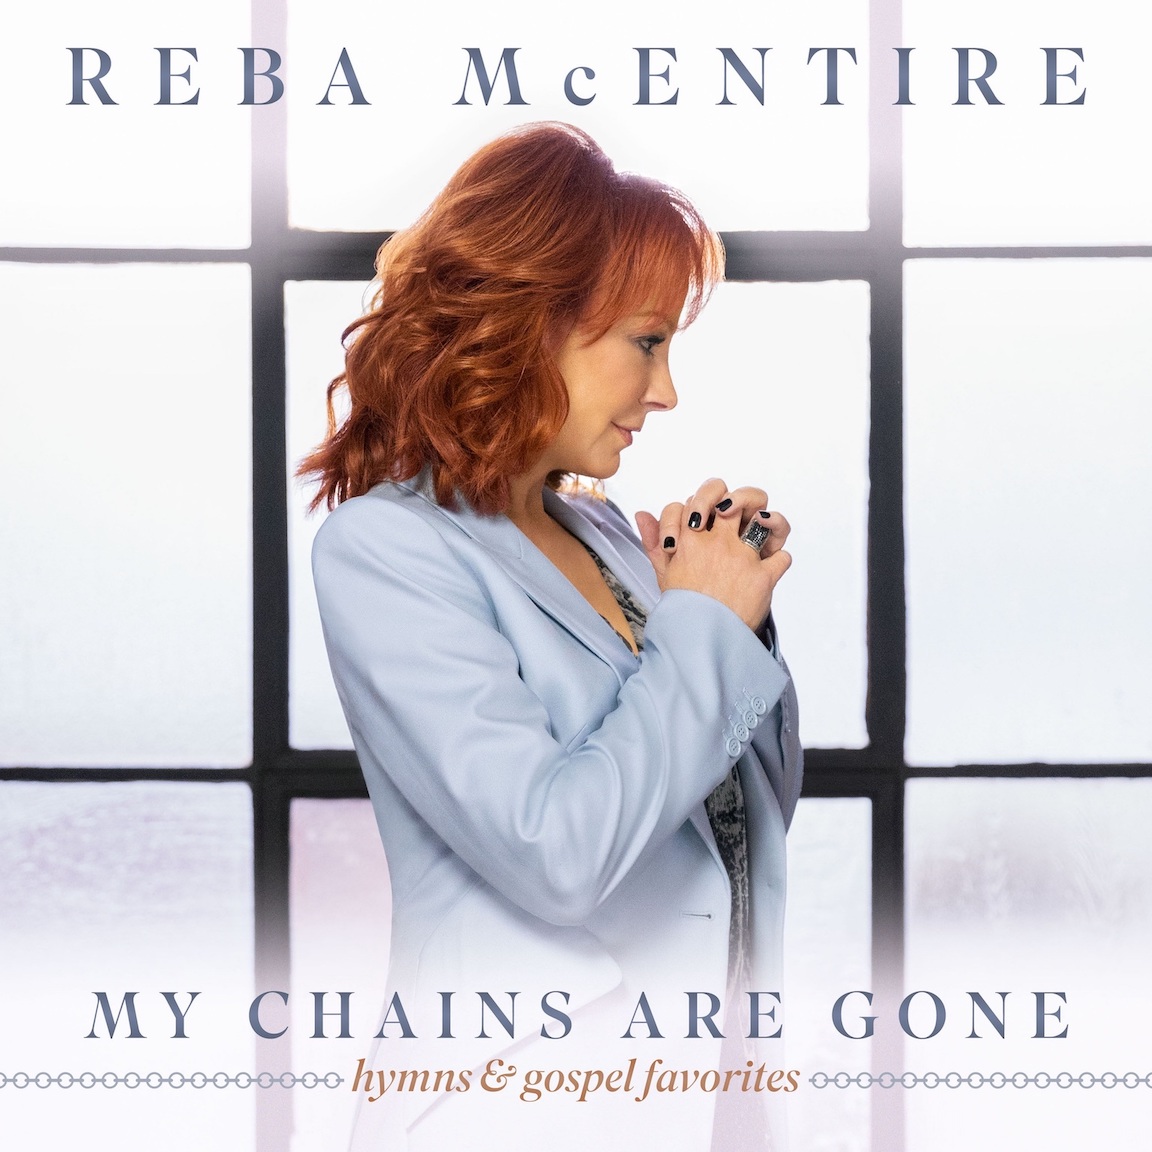 Reba McEntire, `My Chains Are Gone` (Image courtesy of Universal Music Group Nashville)